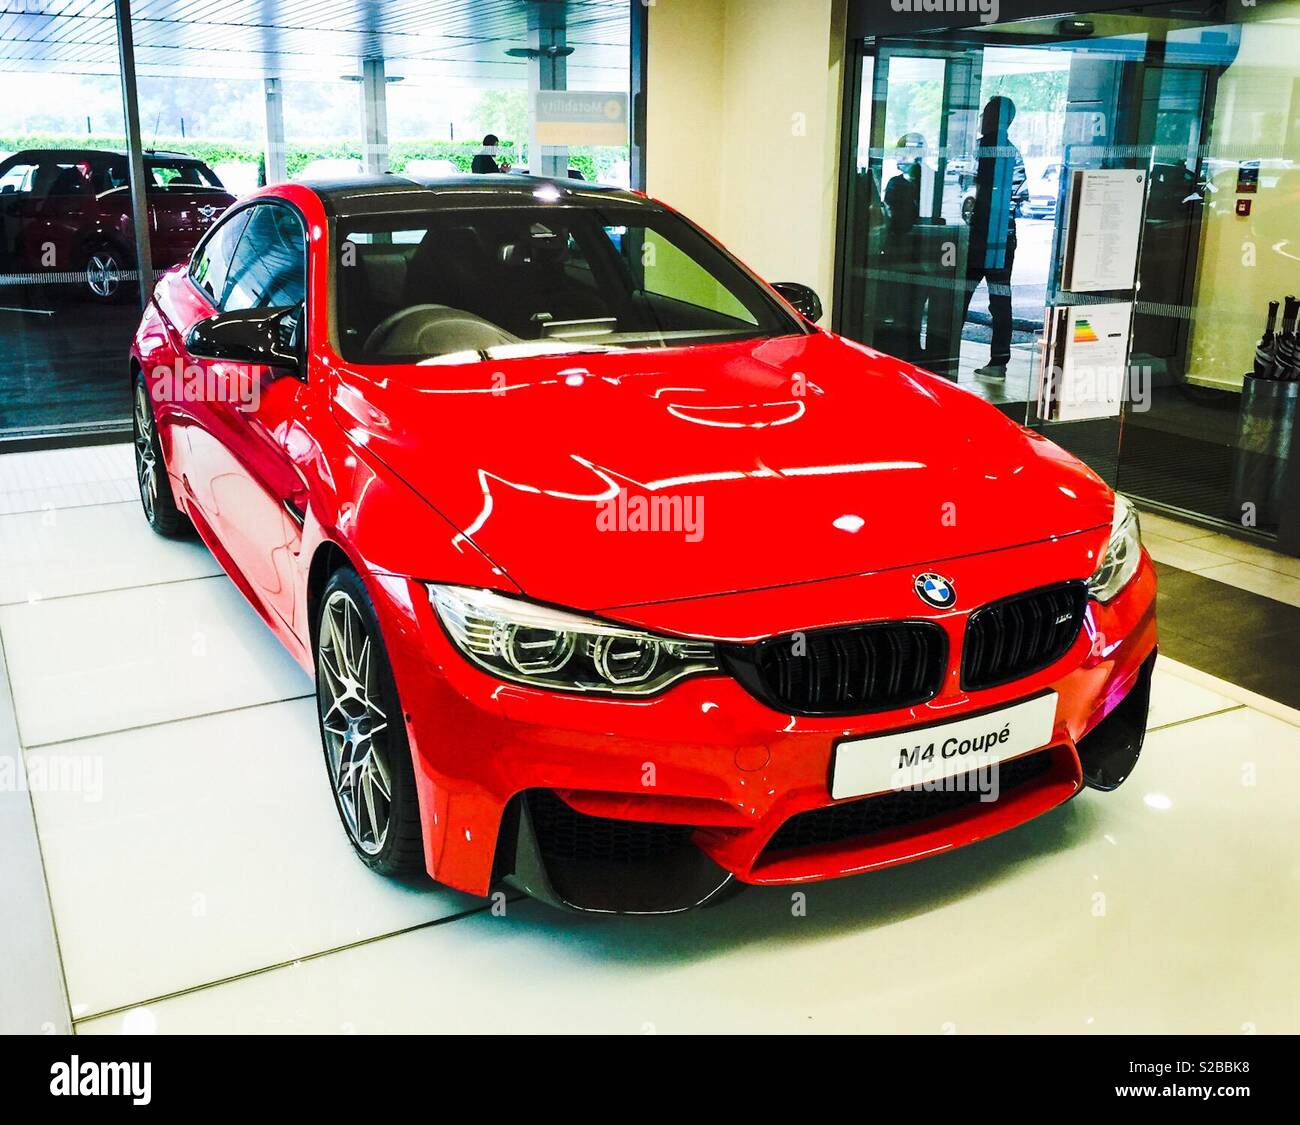 Red BMW M4 Coupe for sale in showroom Stock Photo